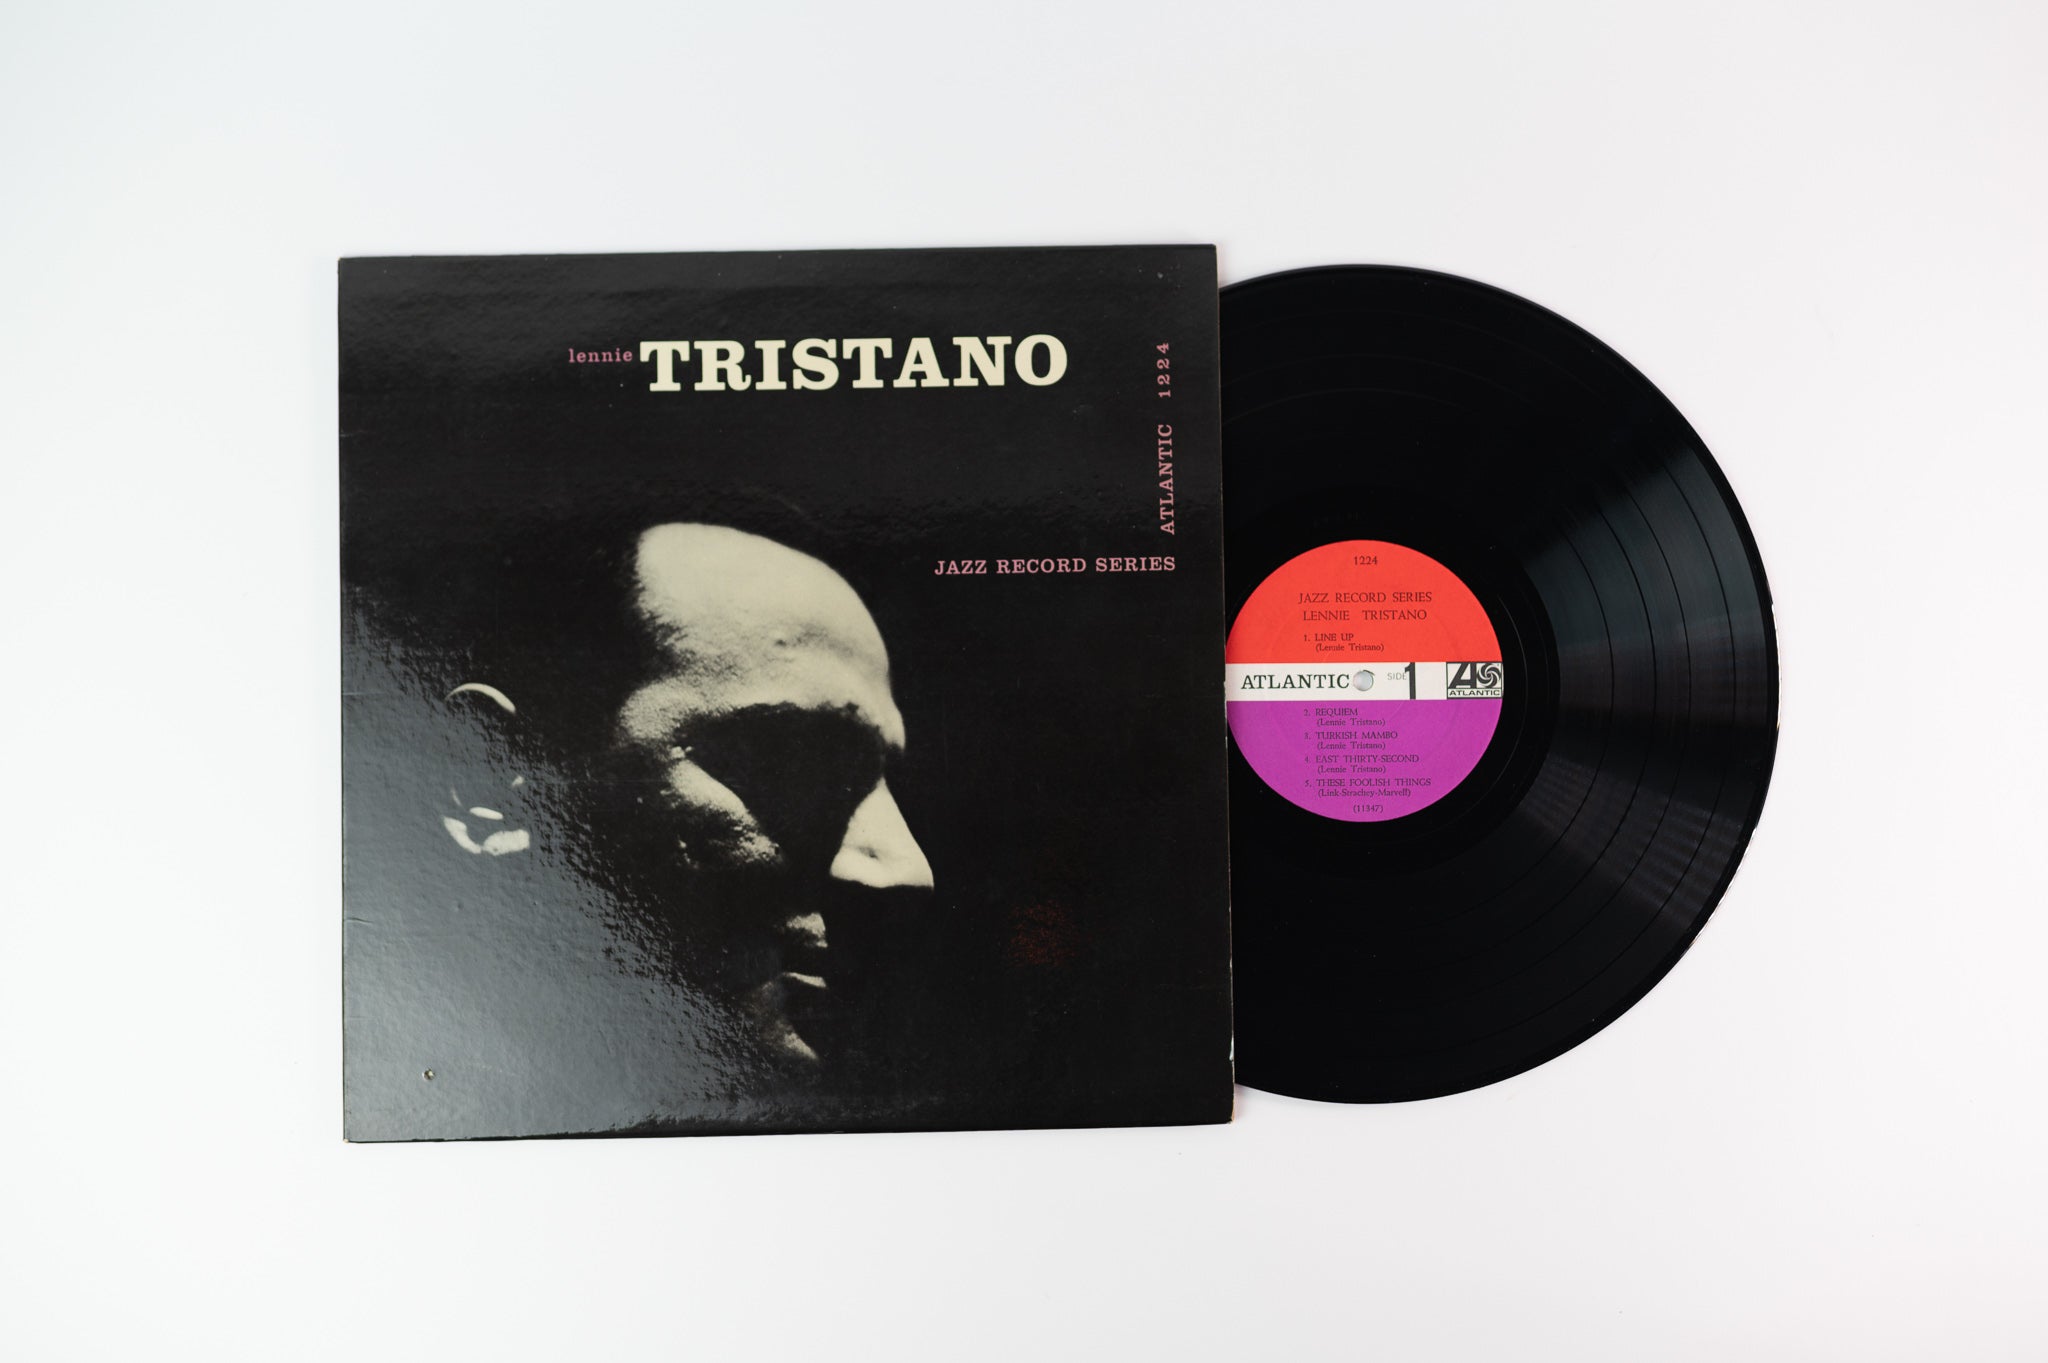 Lennie Tristano - S/T Self-Titled on Atlantic